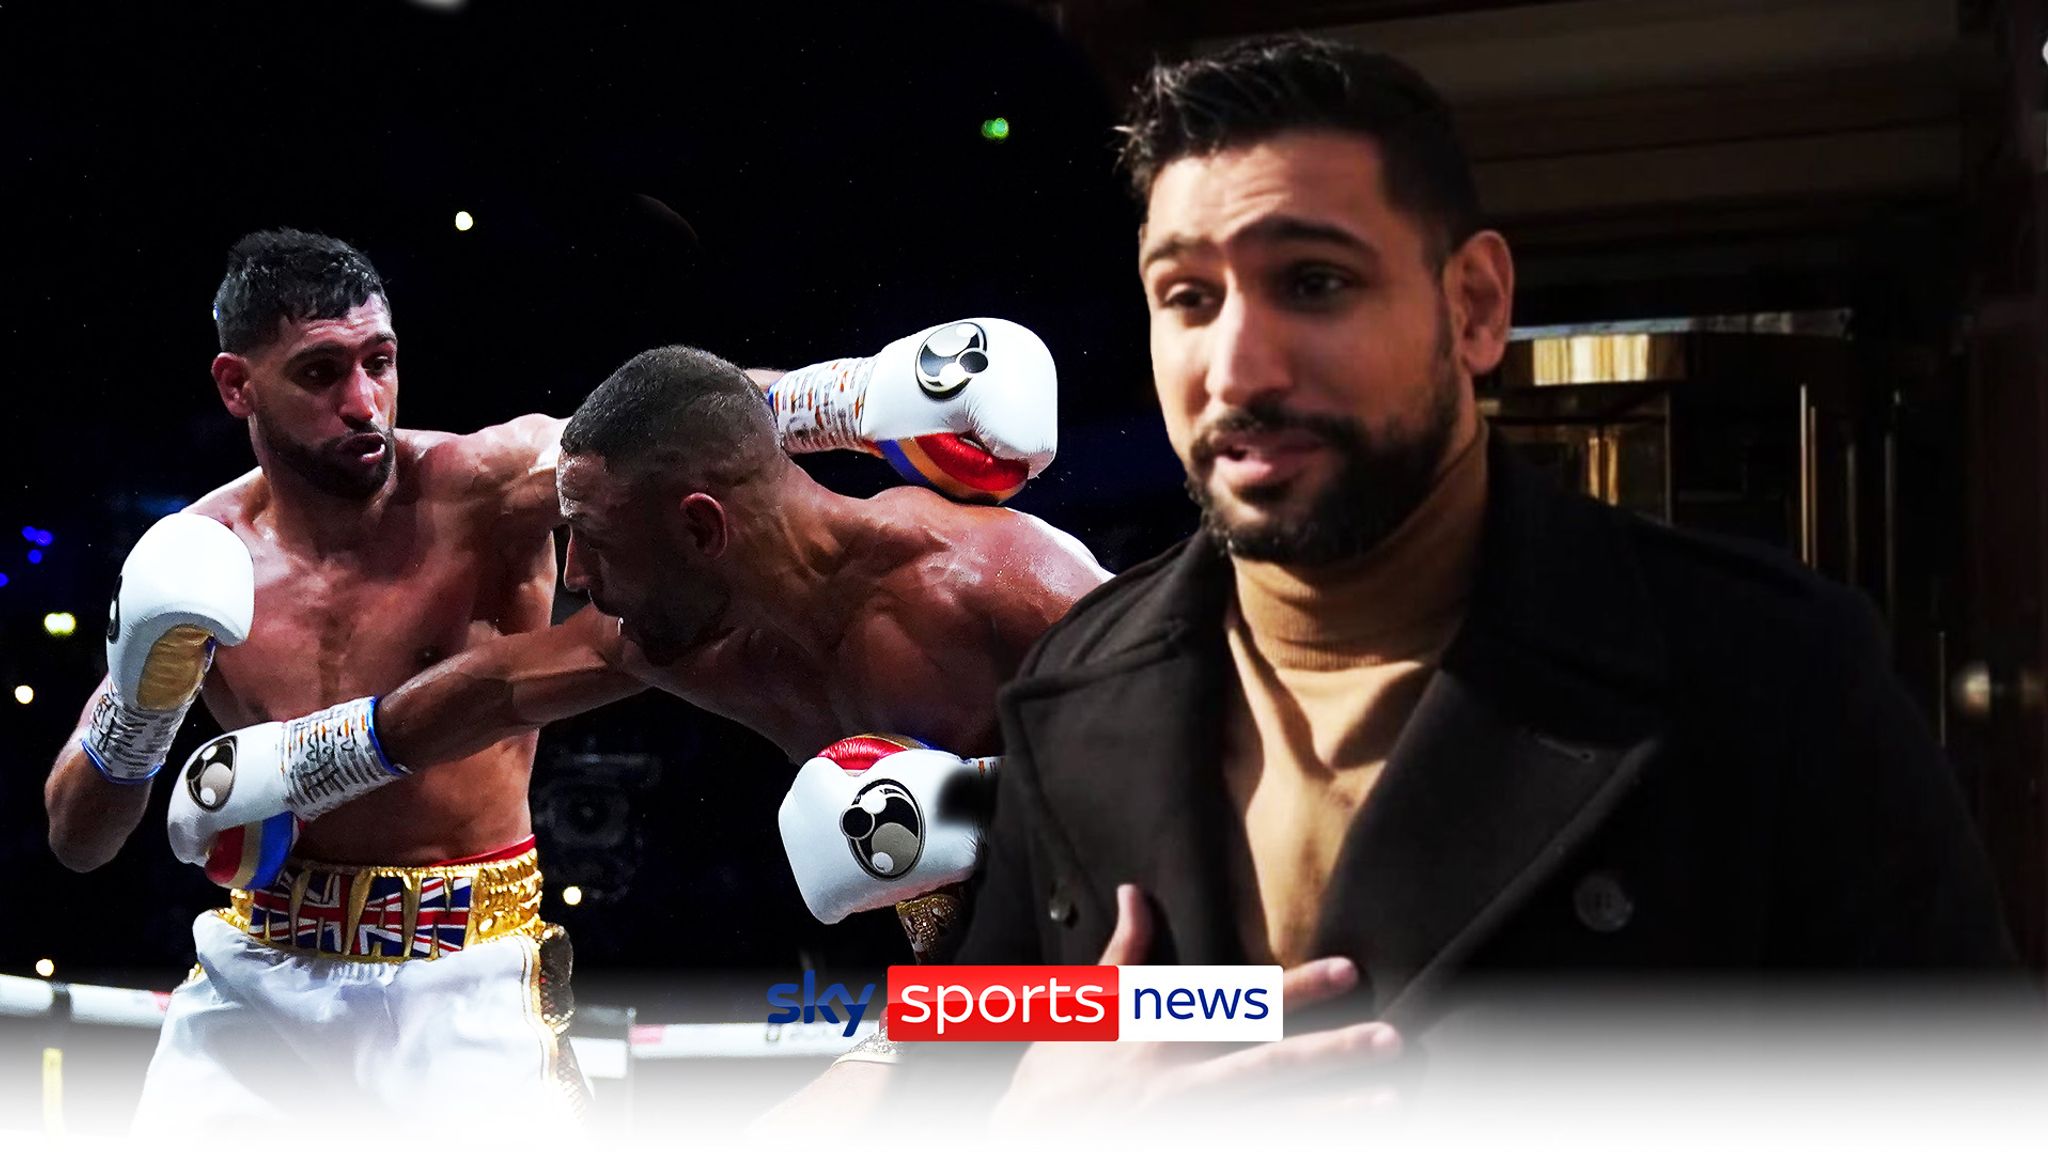 Amir Khan banned from boxing and all other sports following anti-doping violation Ive never cheated in my life Boxing News Sky Sports